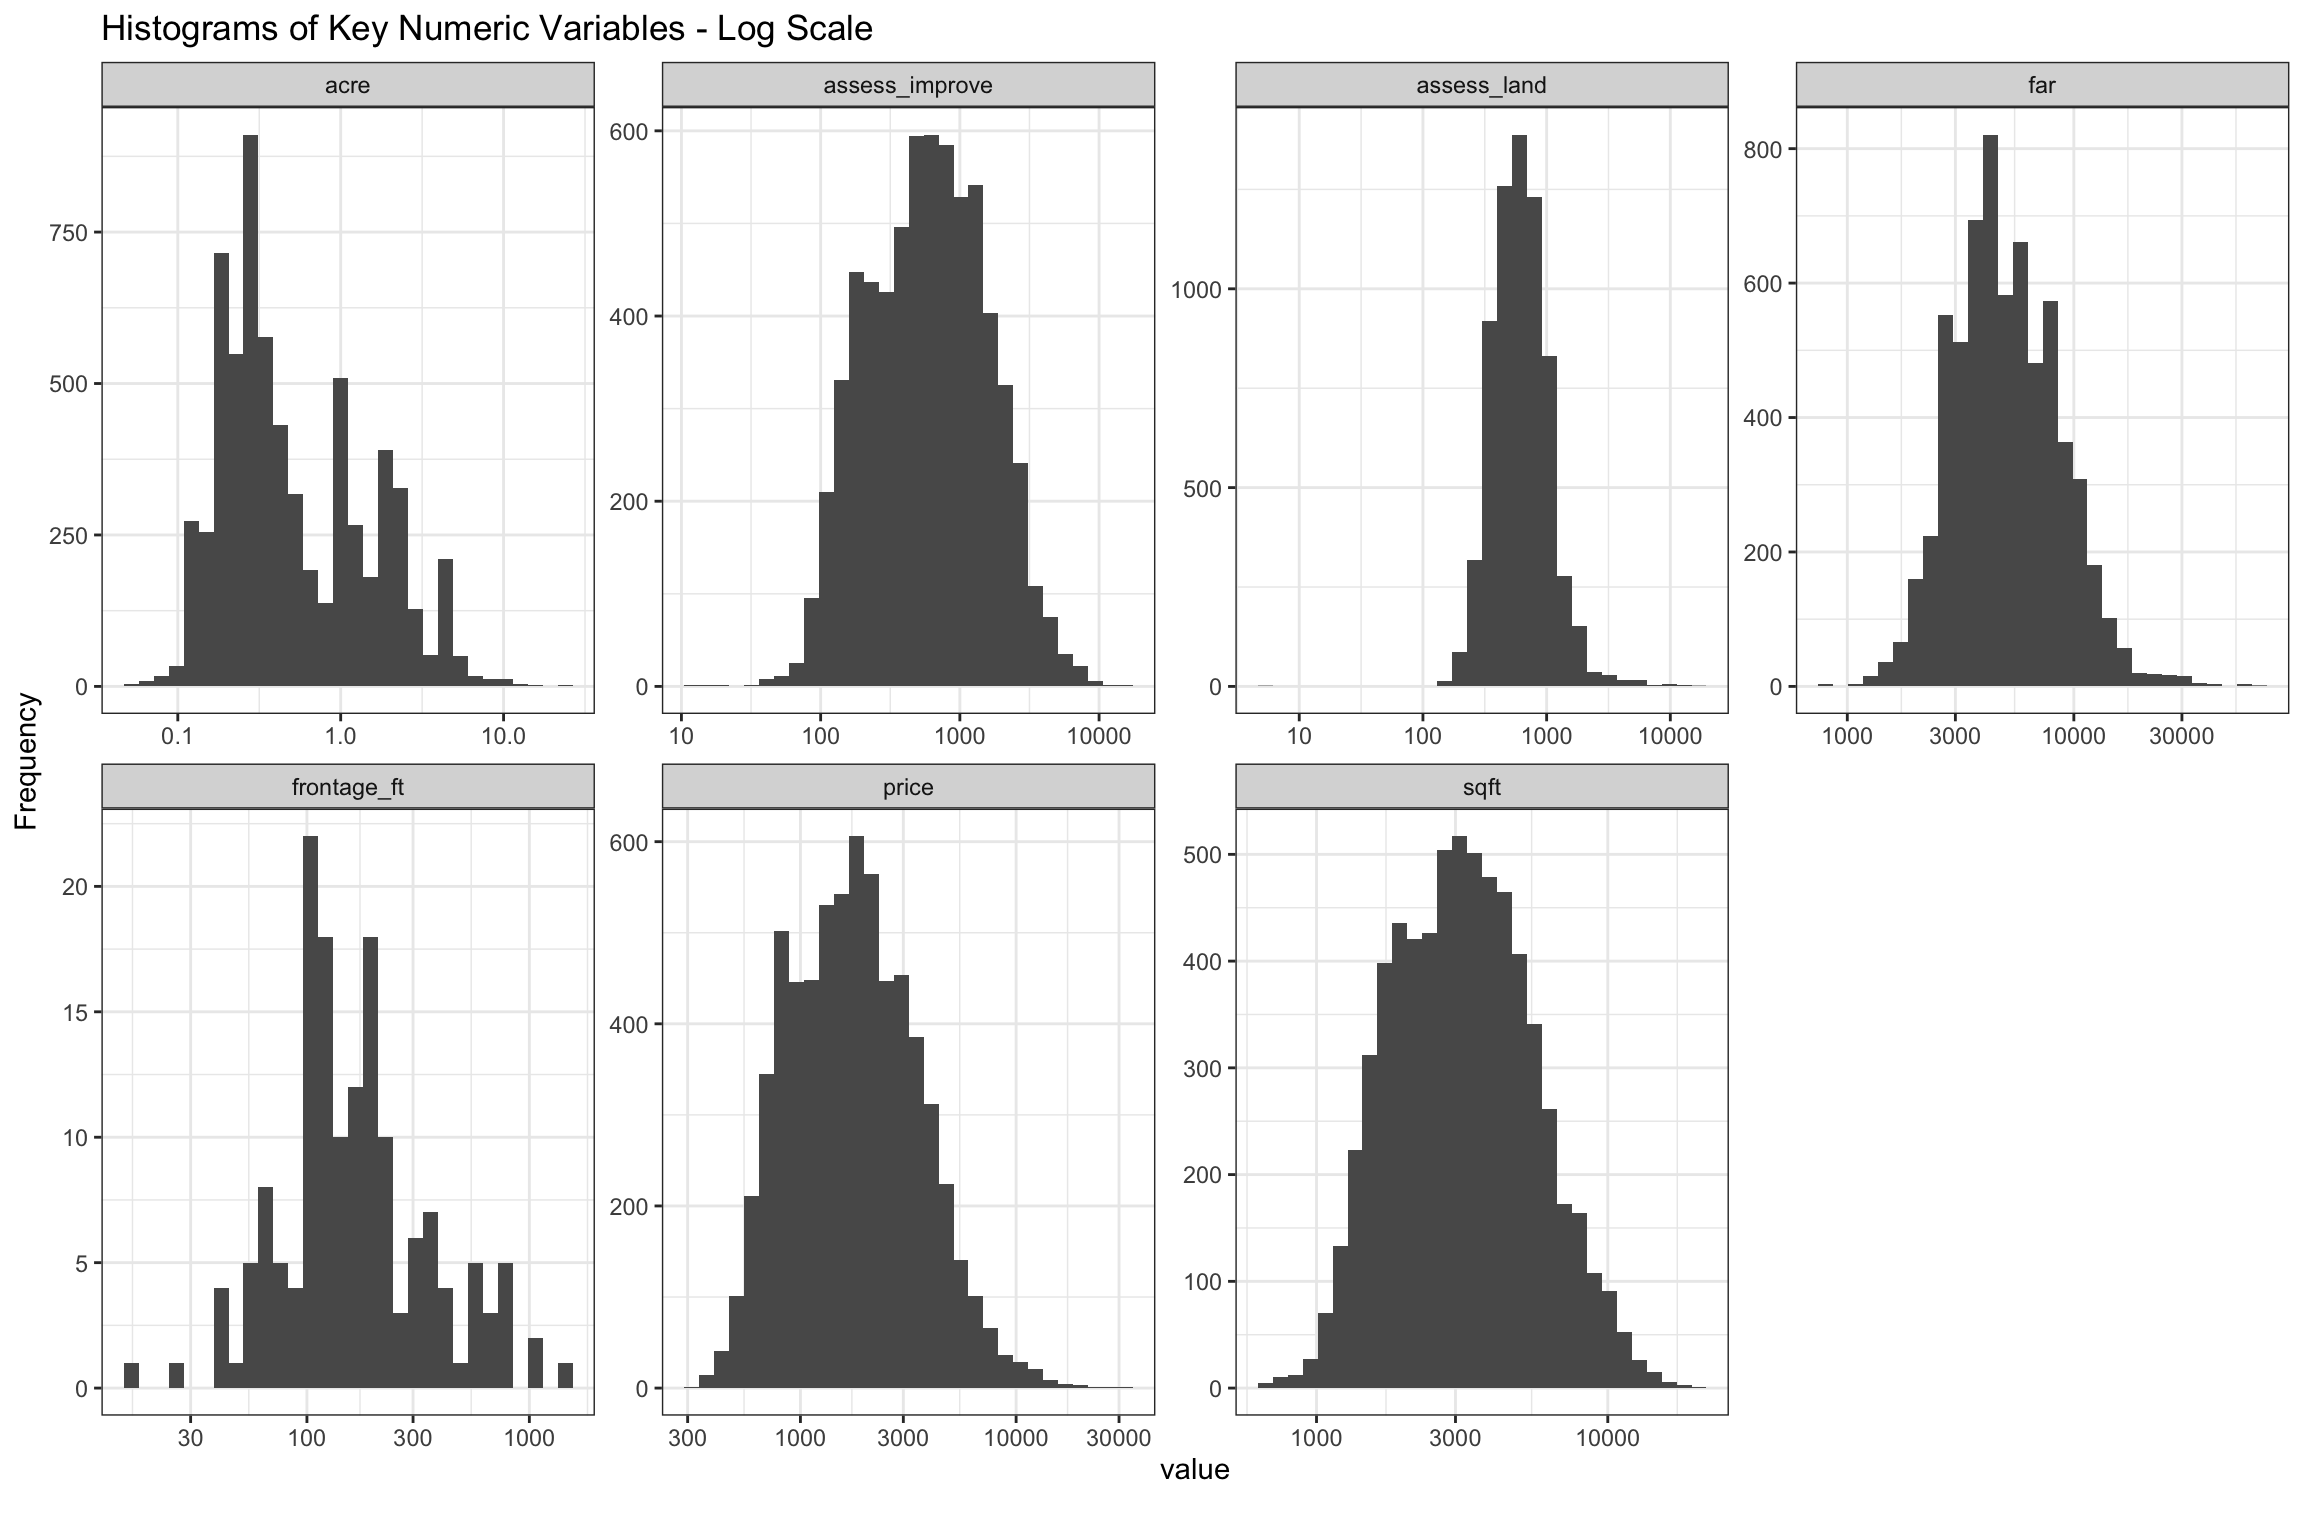 Histograms of Key Numeric Variables on Log10 Scale from 2003-2020